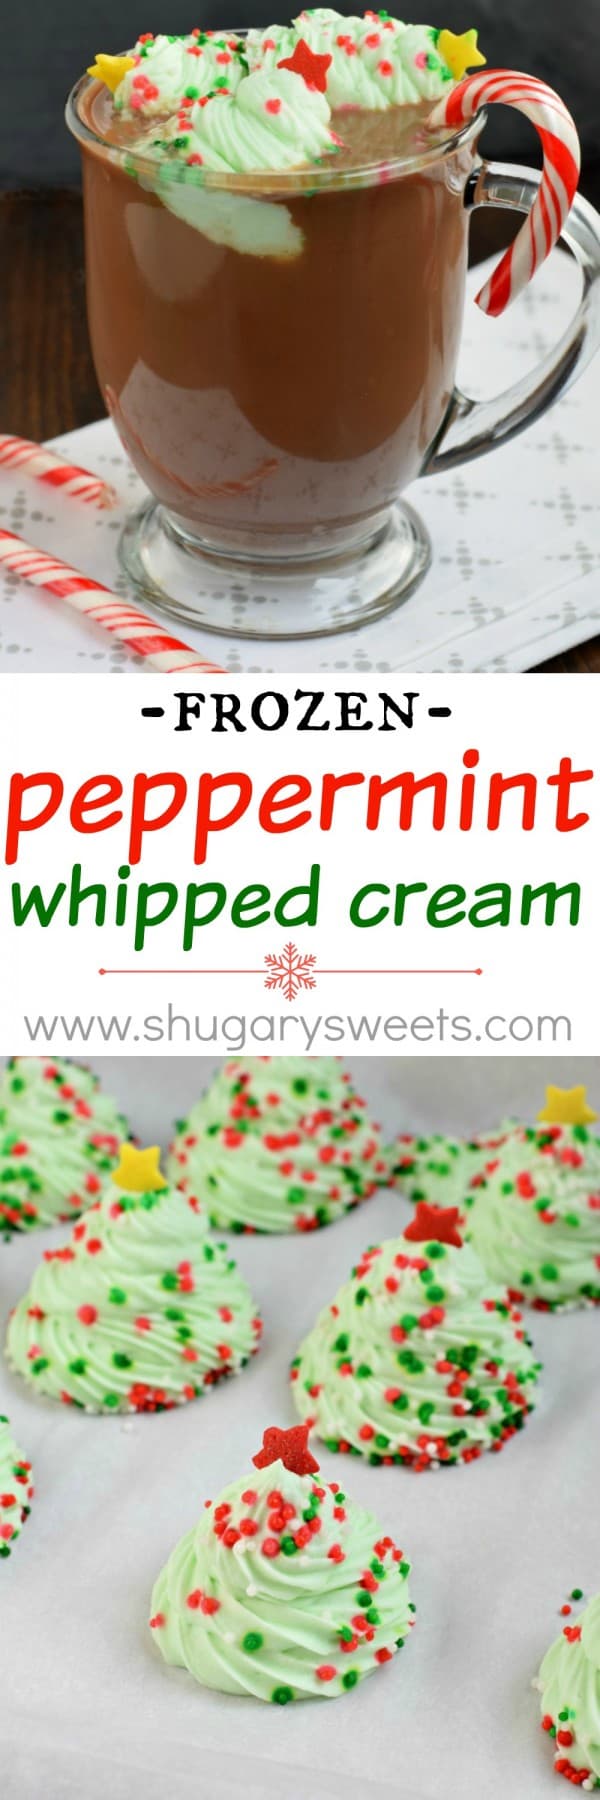 Frozen Peppermint Whipped Cream (Christmas Trees) to add fun and flavor to your hot chocolate or coffee this holiday season! Easy to make this recipe ahead of time and freeze until ready to enjoy.